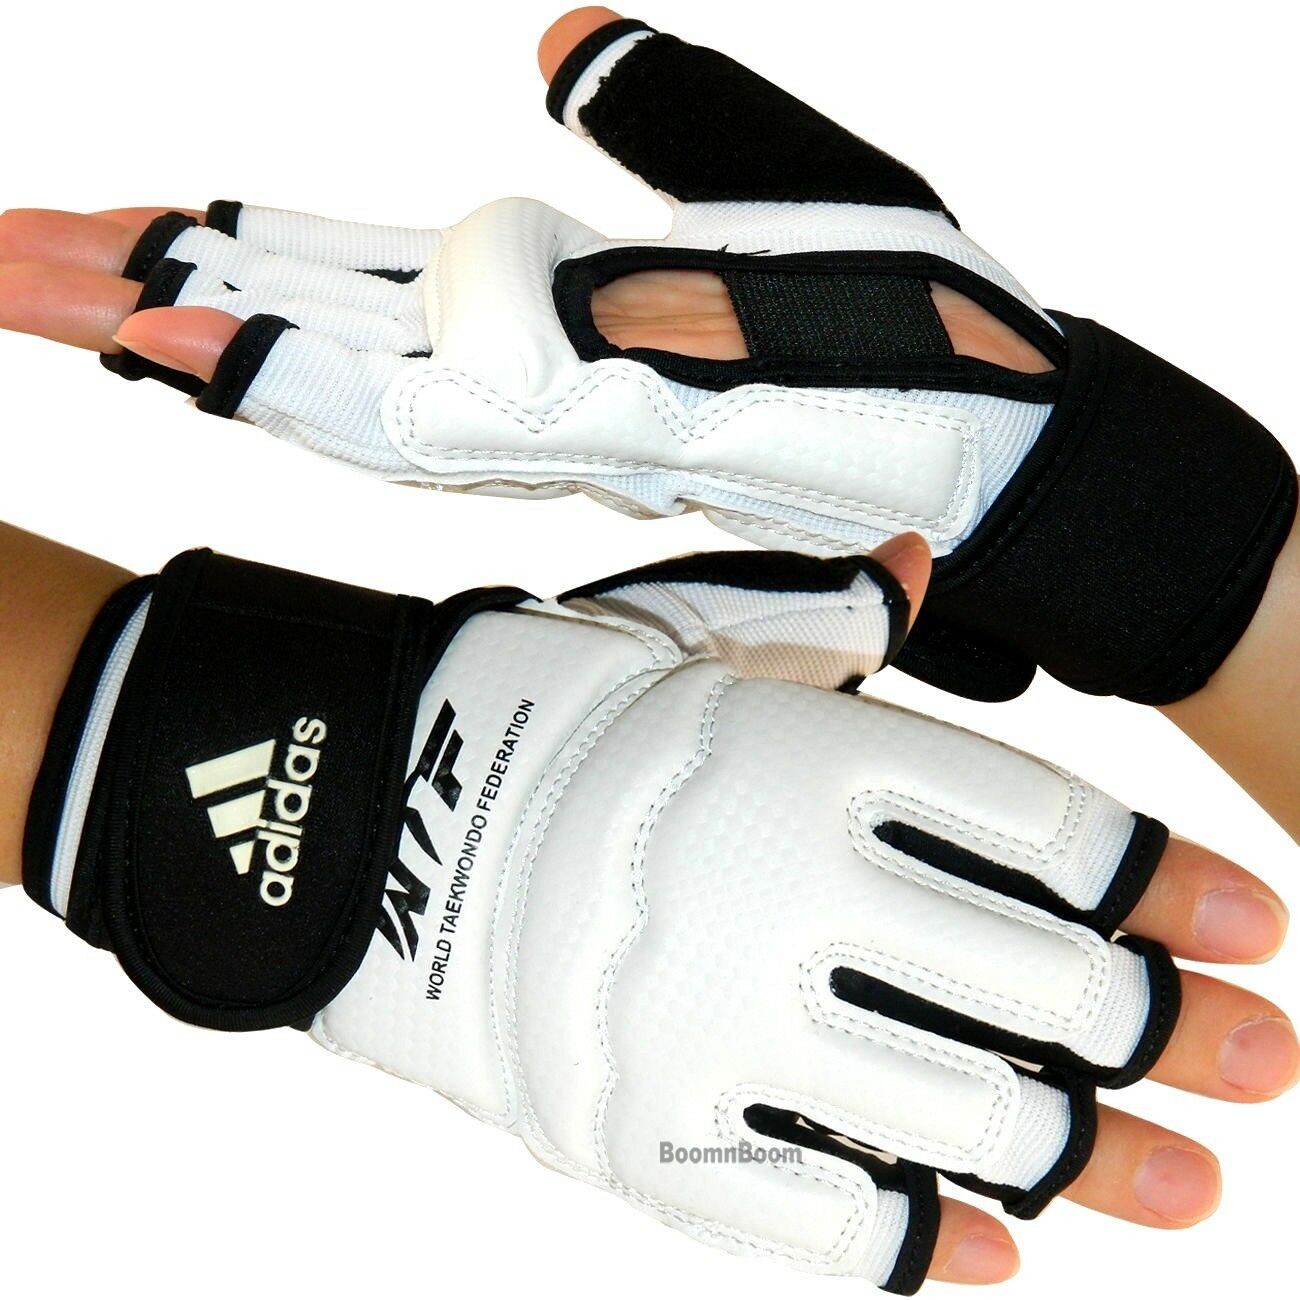 New Adidas Taekwondo Hand Protector Gloves Mma Karate Sparring Gear-wtf Approved